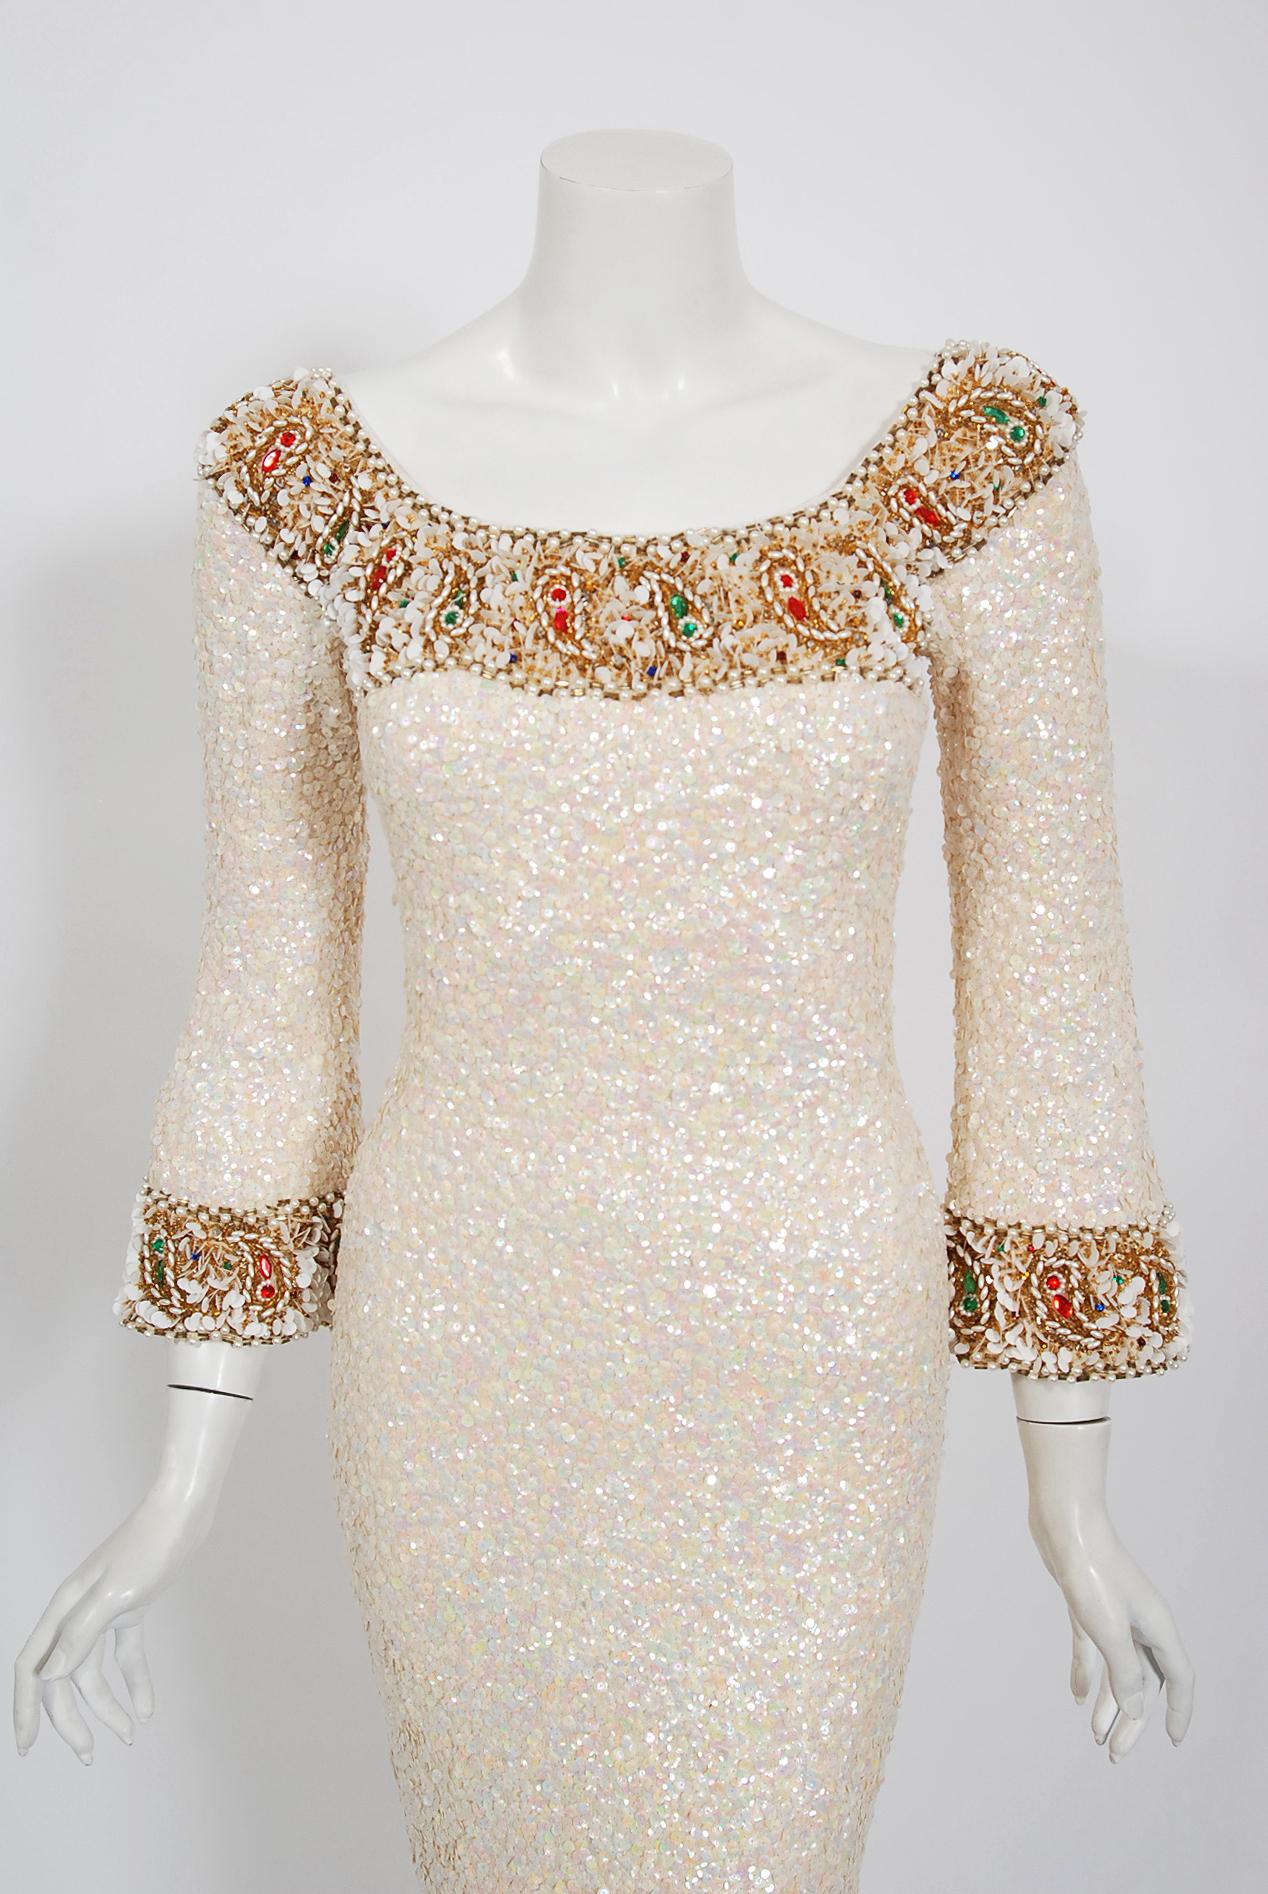 Mid-century Gene Shelly designer garments are in a class of their own. They are always fully-beaded by hand and fit to flatter the figure. This early 1960's treasure is fashioned in the most stunning ivory creme color, featuring iridescent sequins.